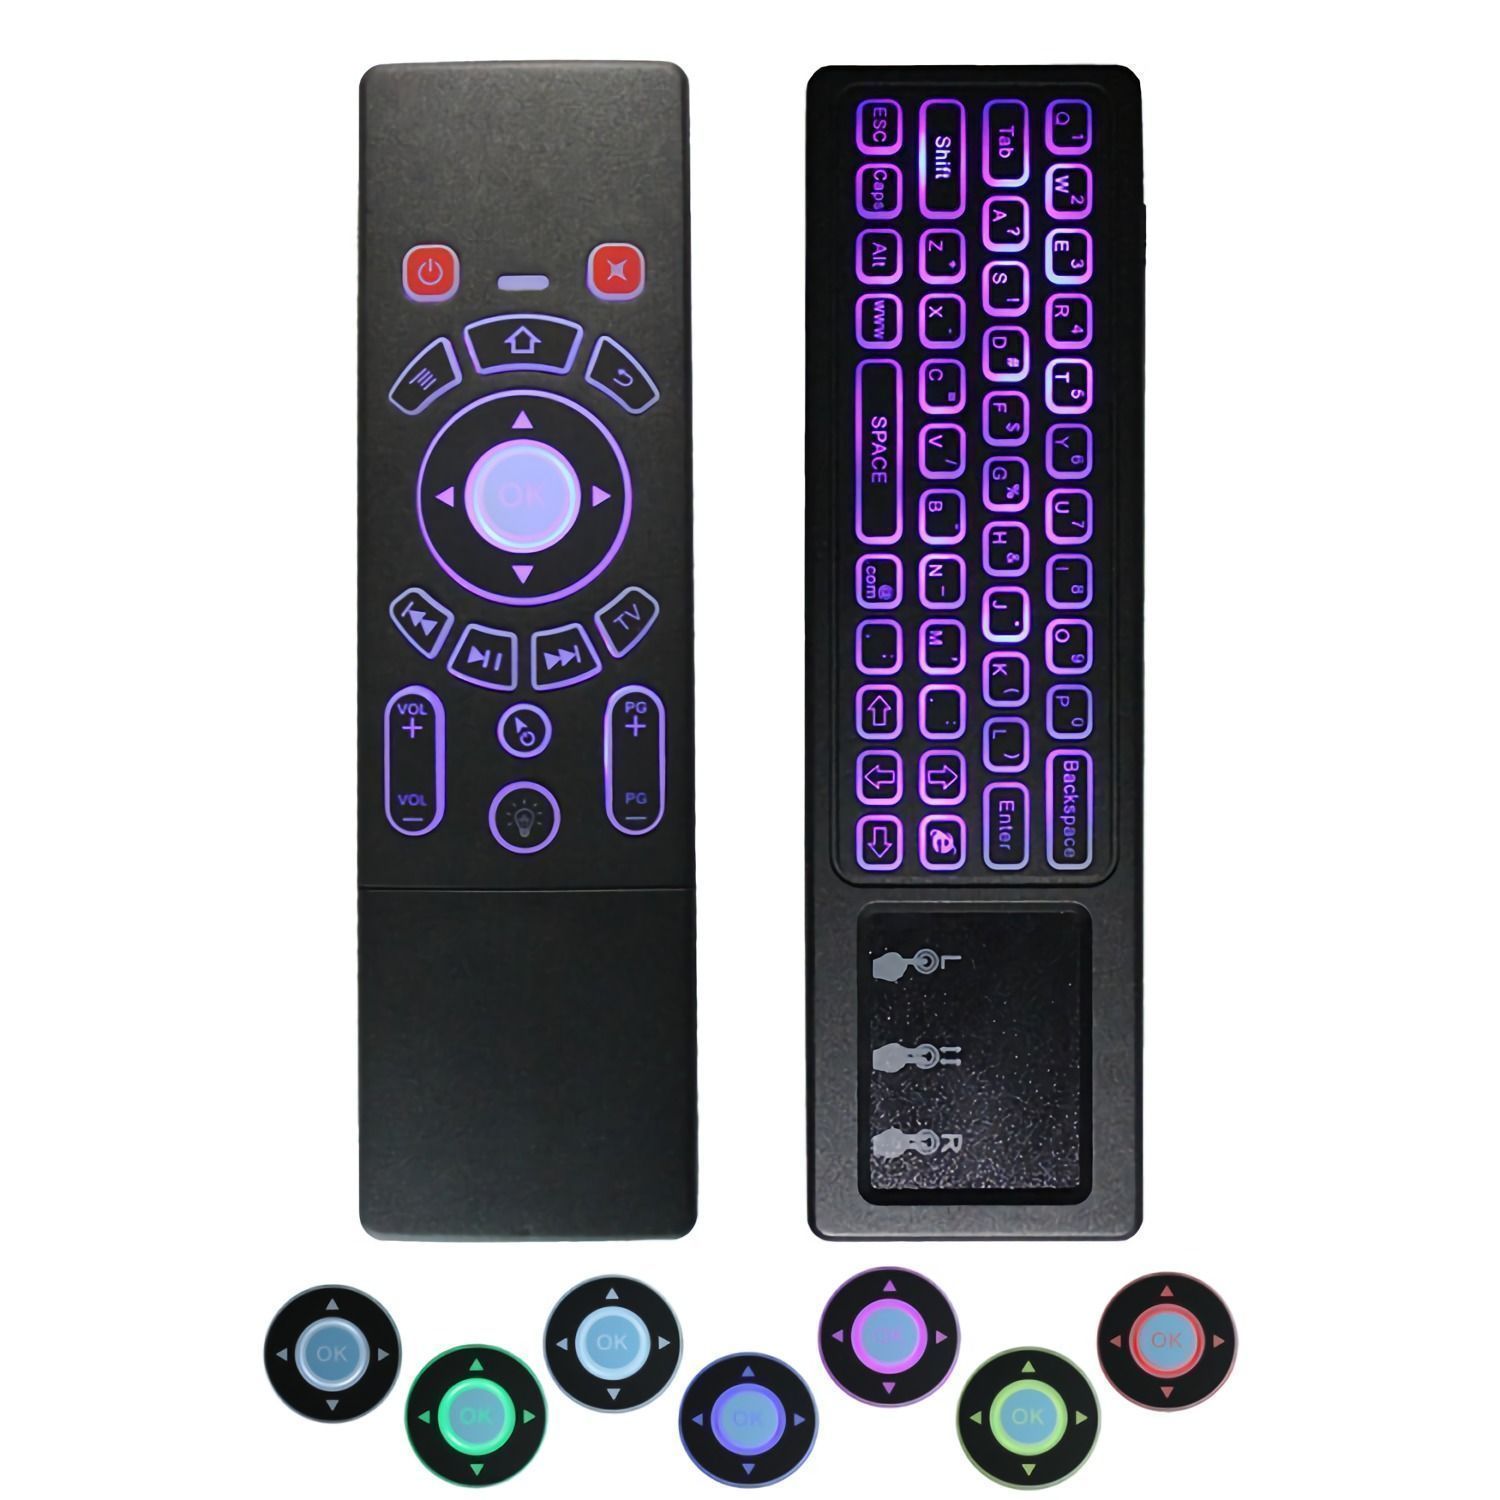 T6C-Air-Mouse-Rainbow-Backlit-Keyboard-with-Touchpad-24Ghz-Wireless-Remote-Control-for-Smart-TV-BoxP-1733716